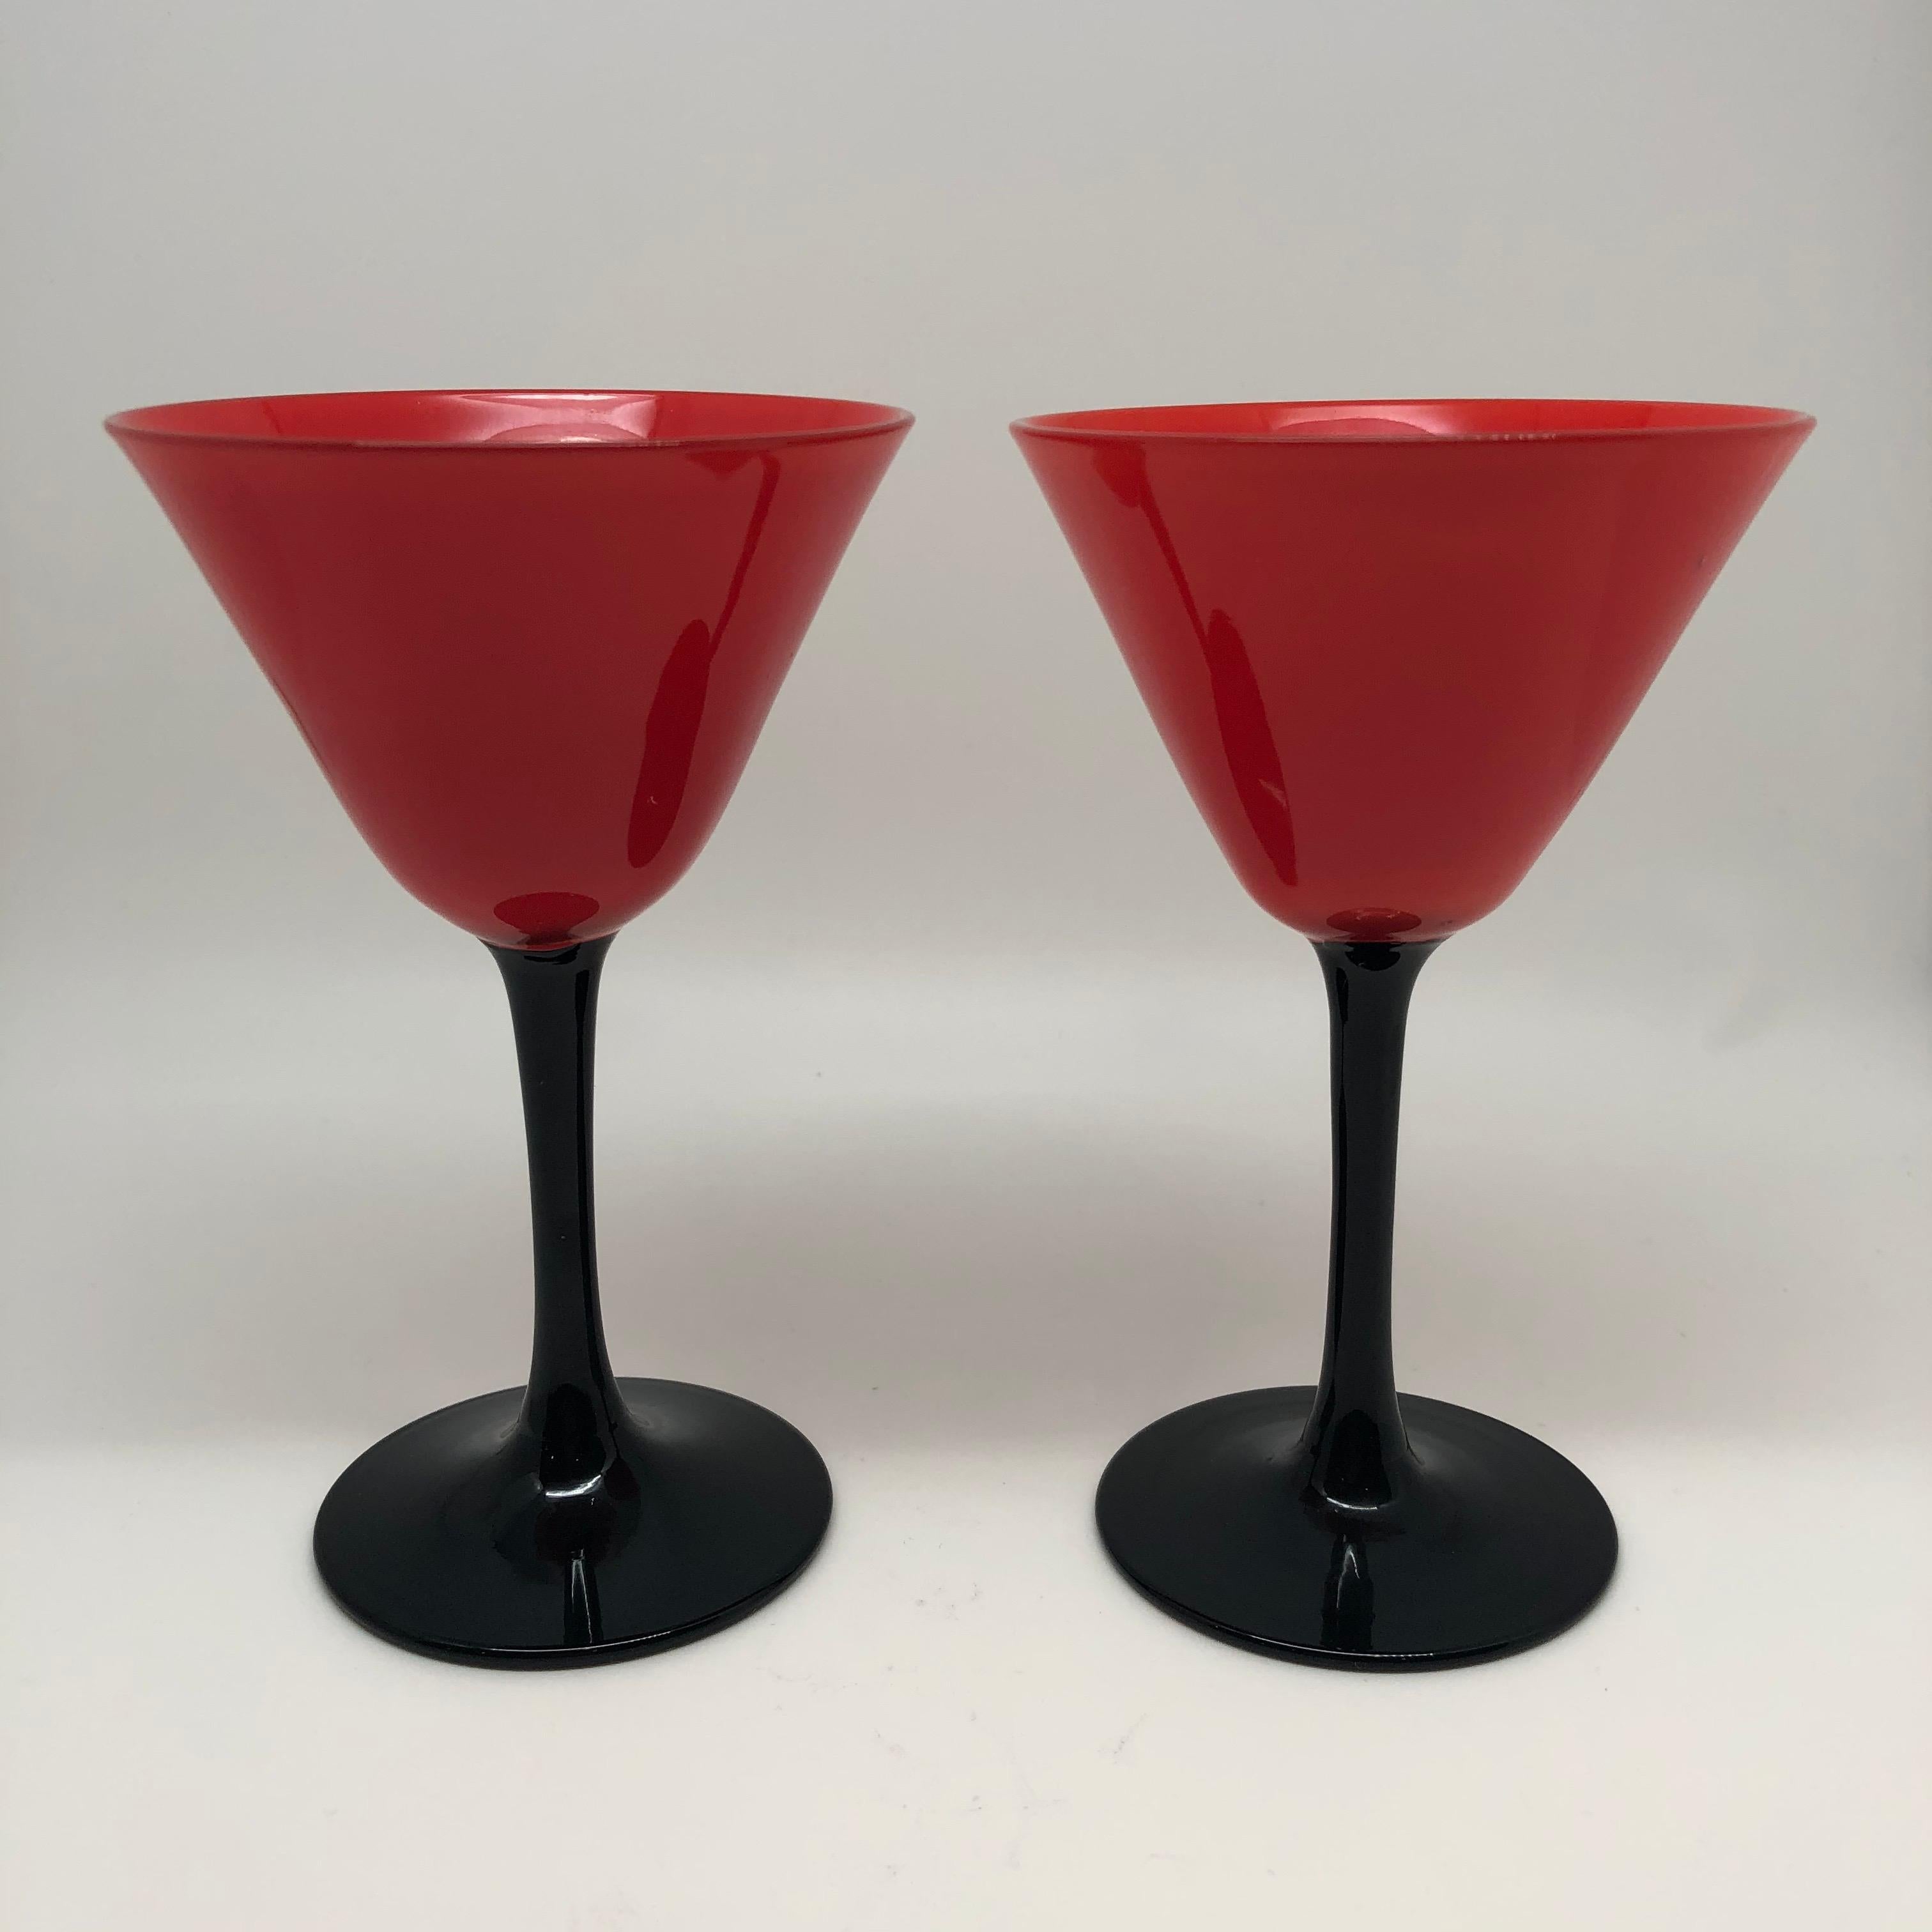 American Set of 11 Pairpoint Art Deco Stemware Glasses with Red Tops and Black Stems